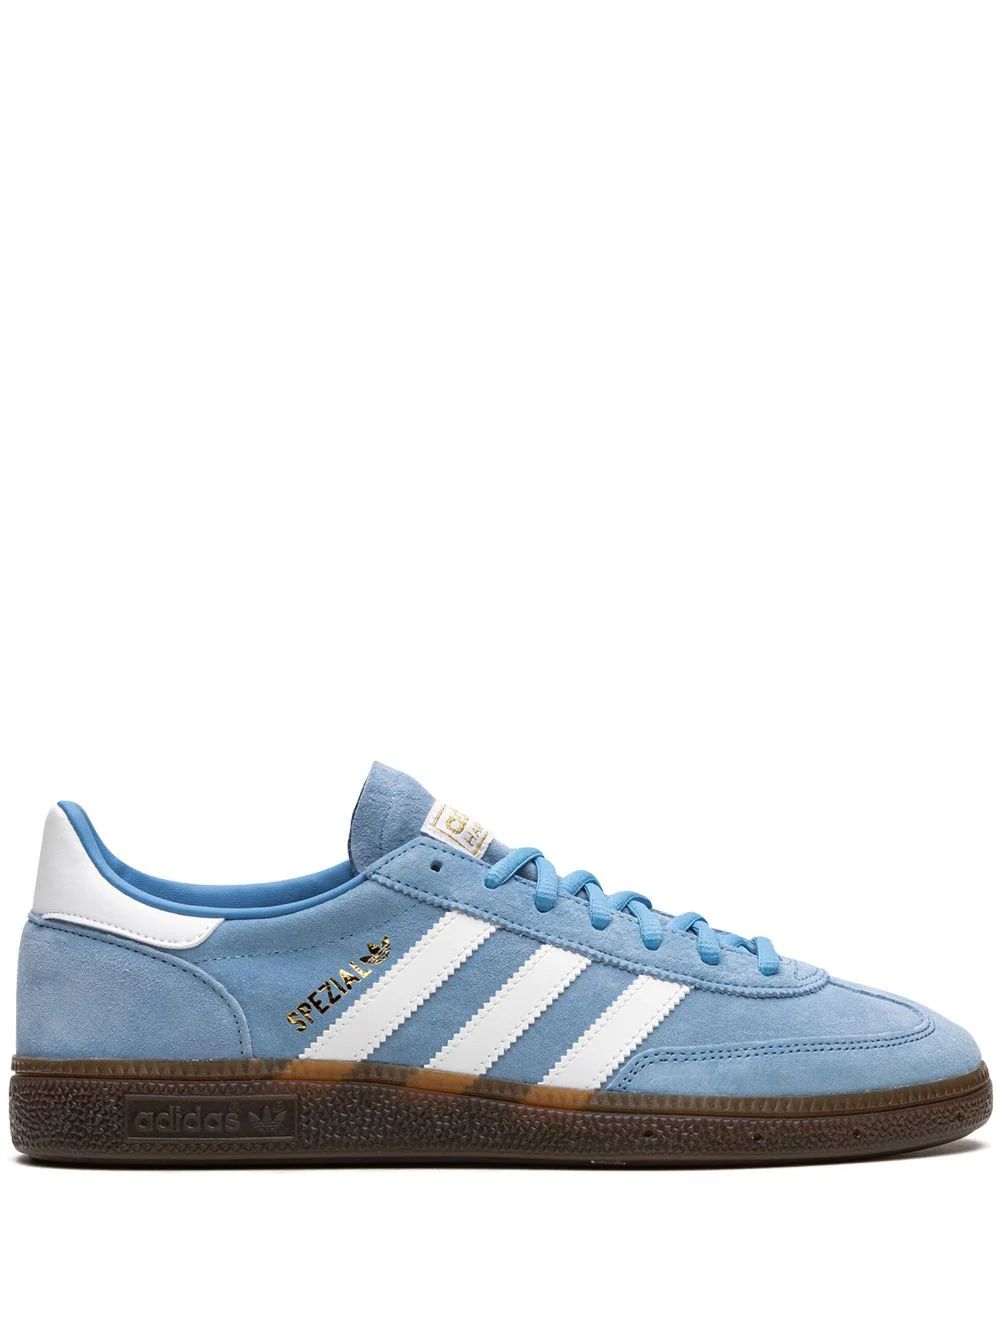 The DetailsadidasHandball Spezial "Light Blue" sneakersA style loved by football fans and streetw... | Farfetch Global